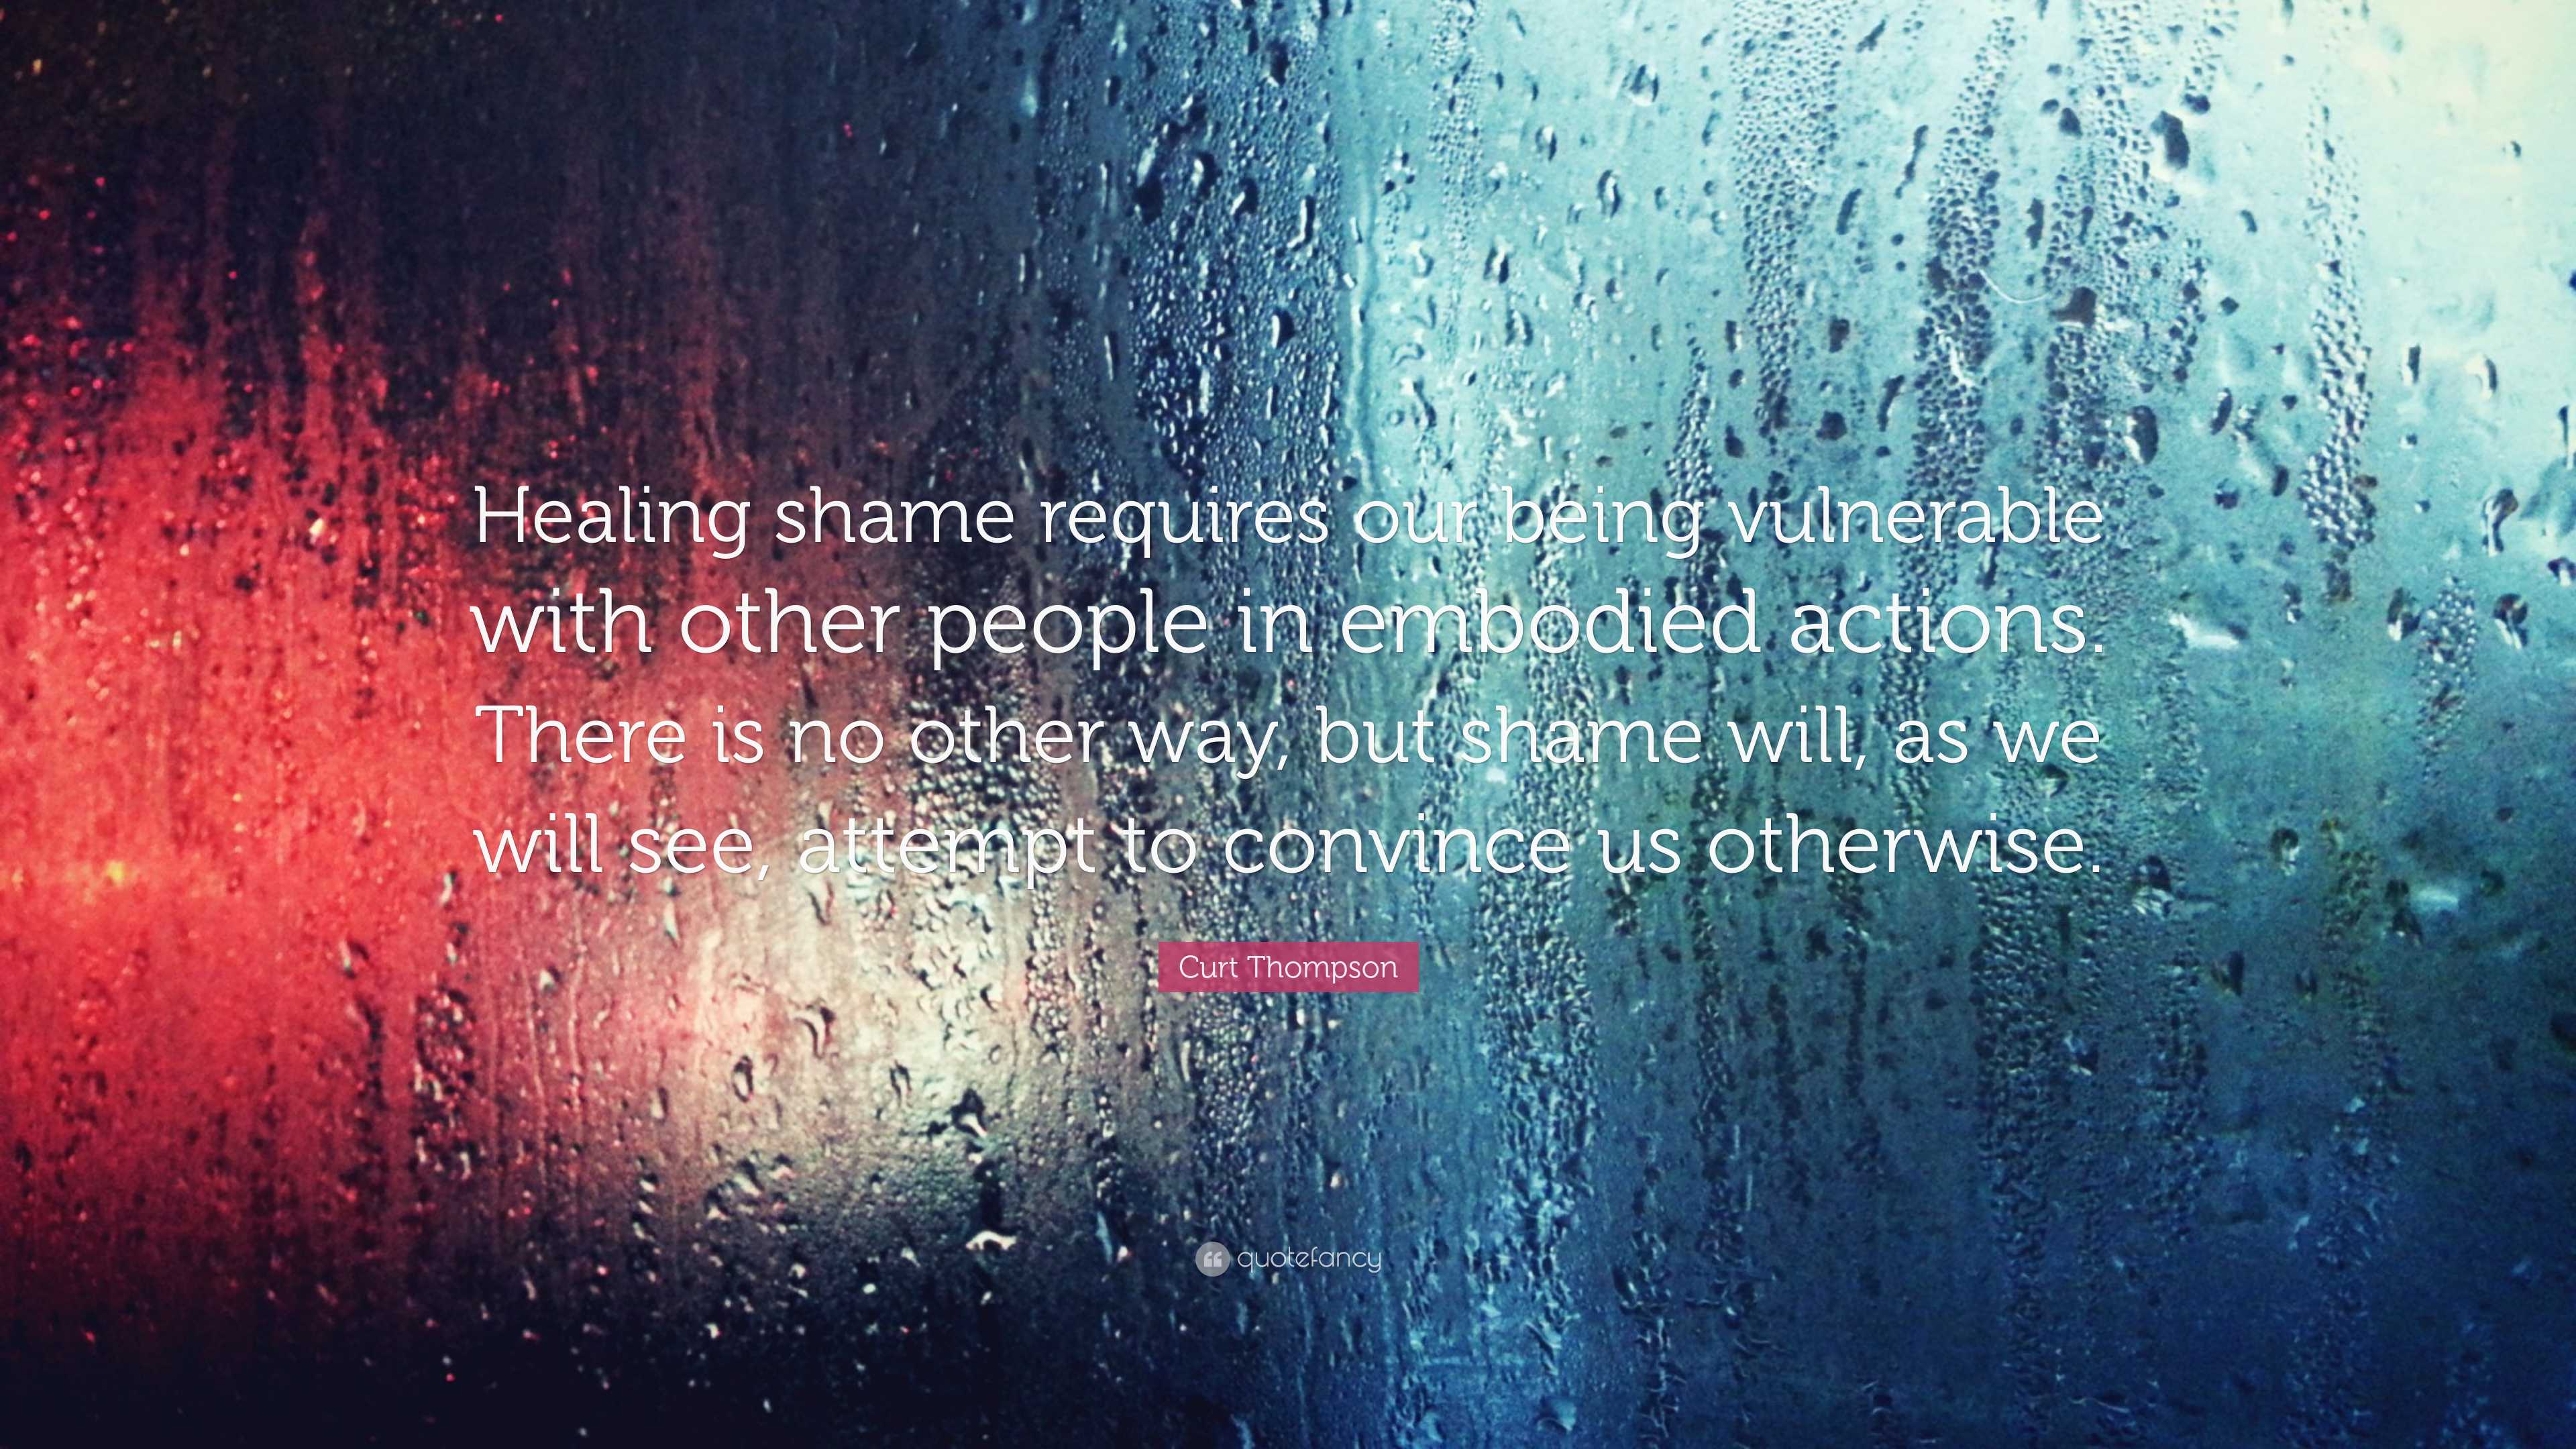 Curt Thompson Quote “Healing shame requires our being vulnerable with